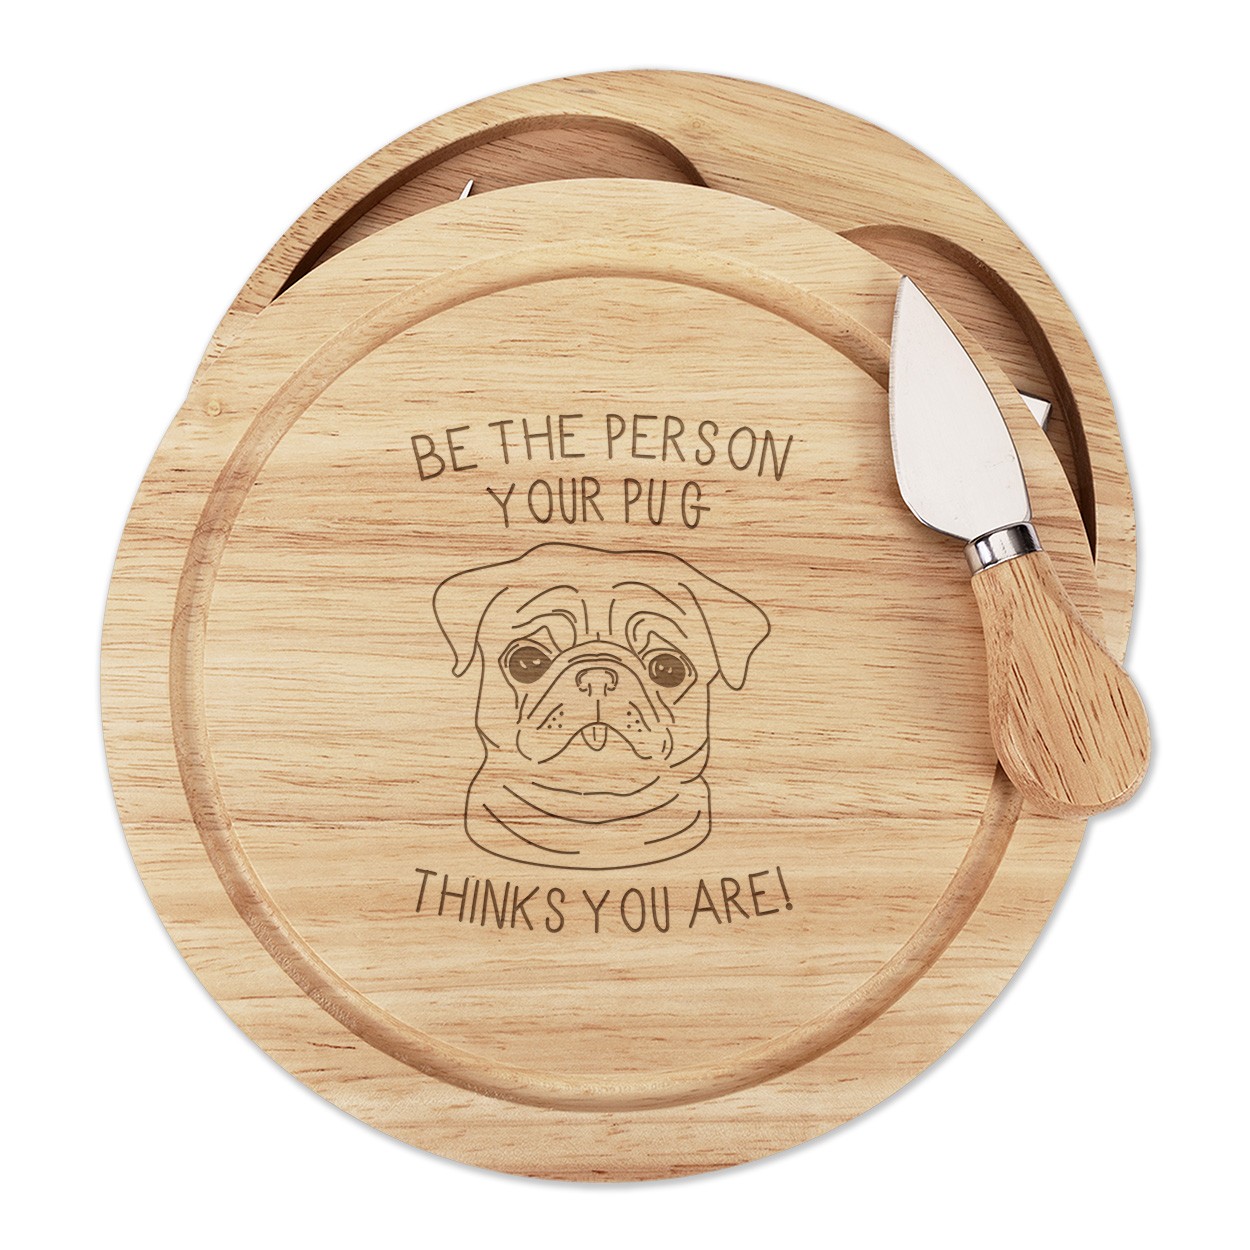 Be The Person Your Pug Thinks You Are Wooden Cheese Board Set 4 Knives